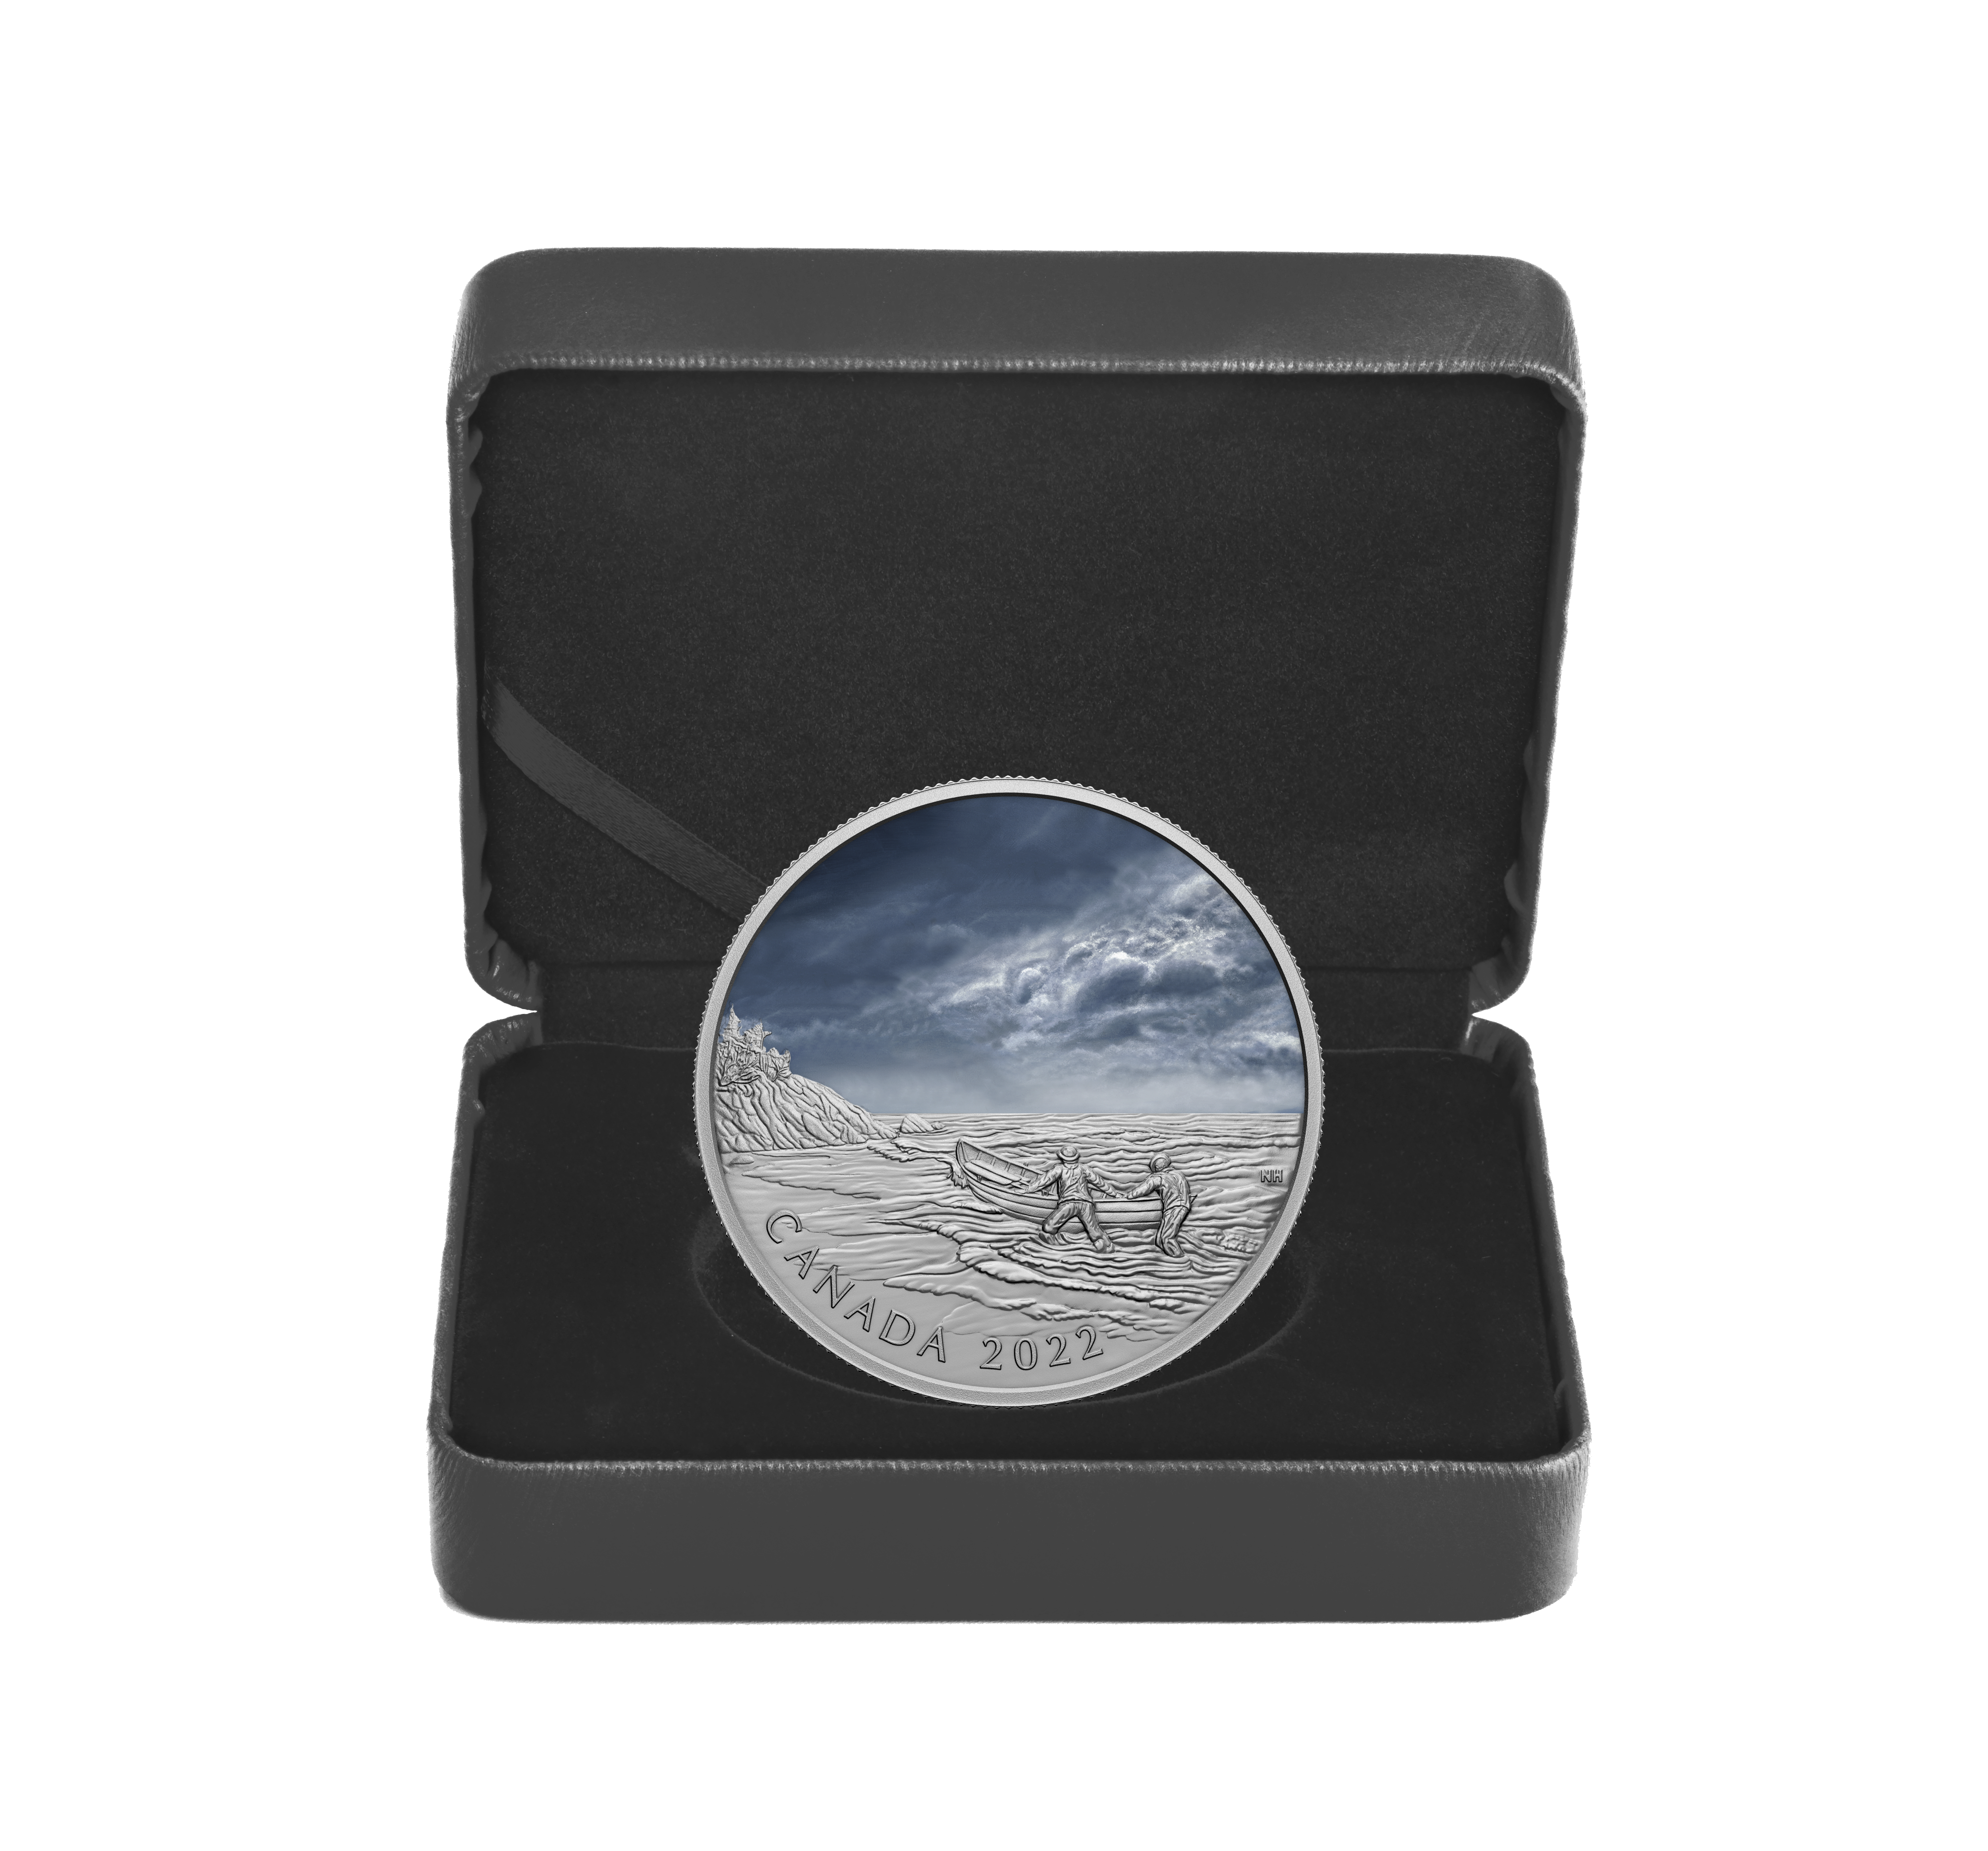 CANADIAN GHOST SHIP Silver Coin $50 Canada 2022